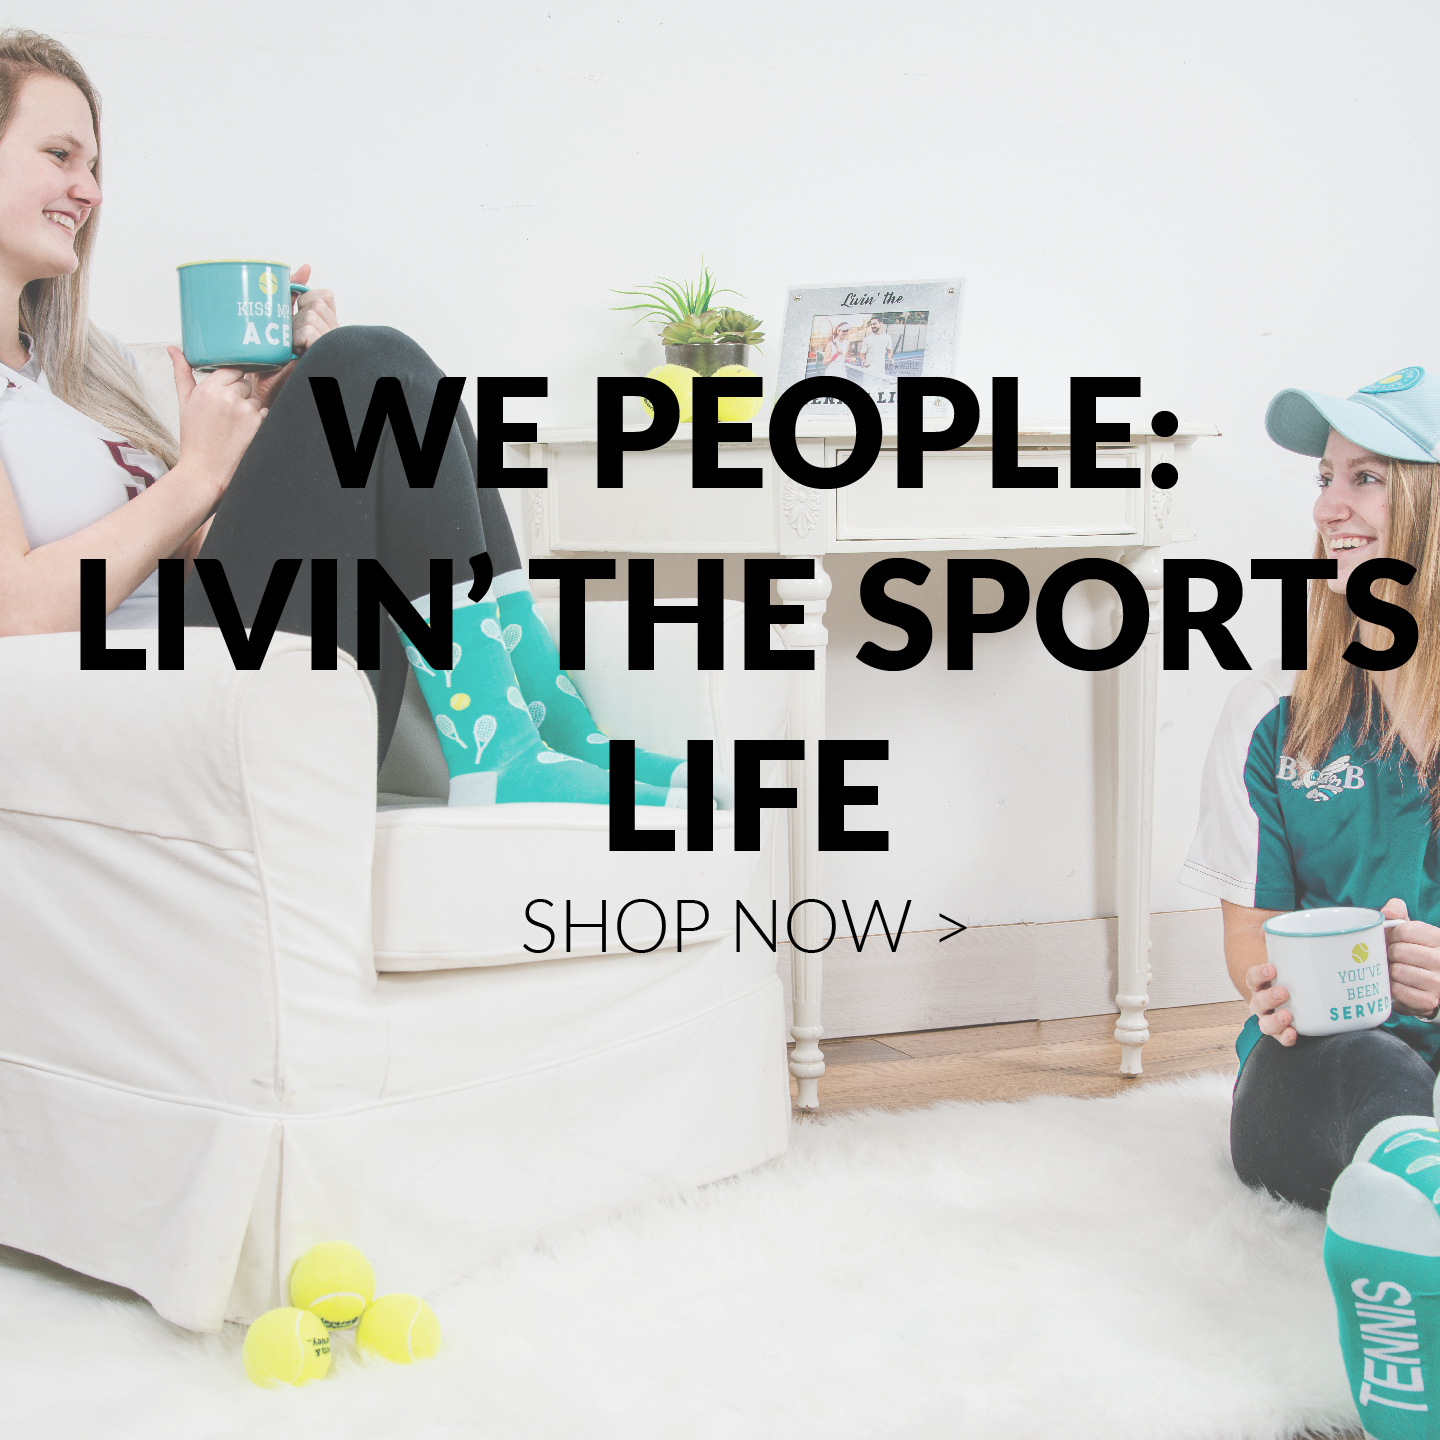 We People: Livin' The Sports Life